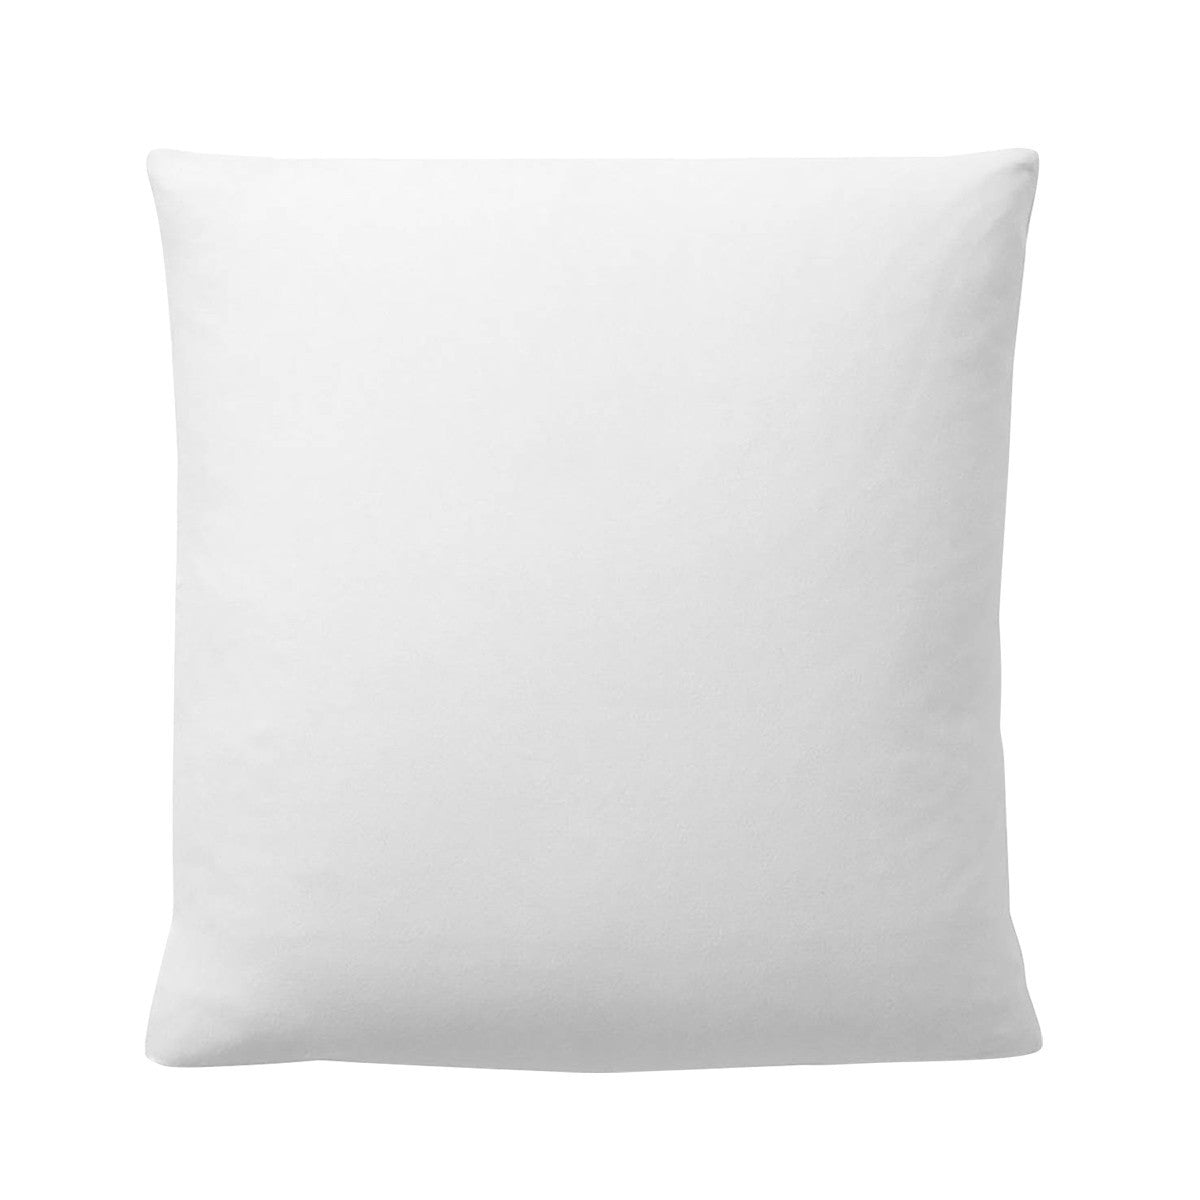 Yves Delorme Pillow Protectors